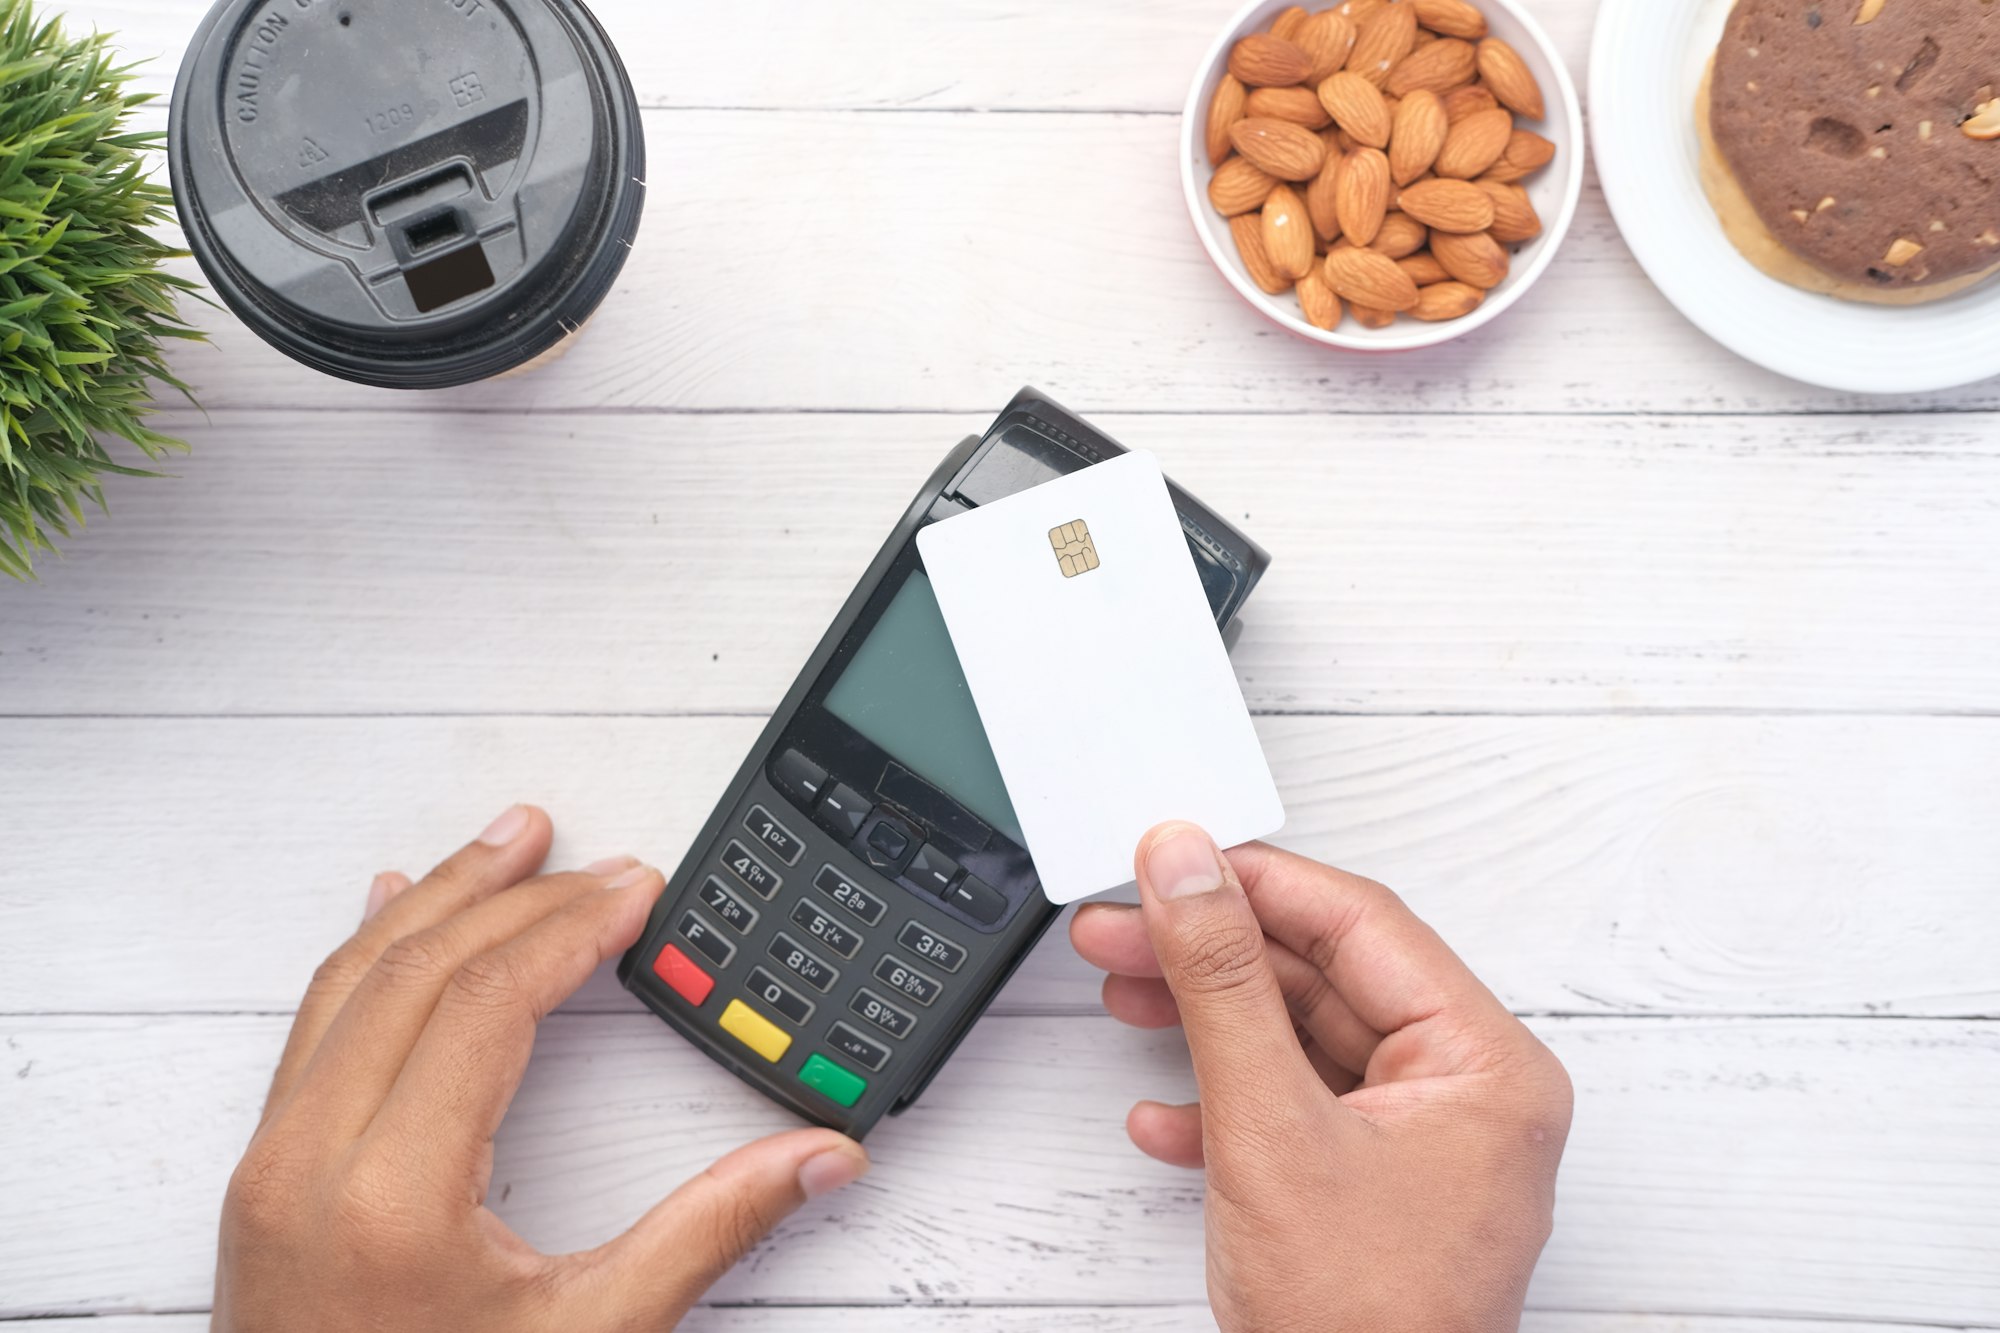 Egypt's Flash raises $6 million to expand its contactless payment solution